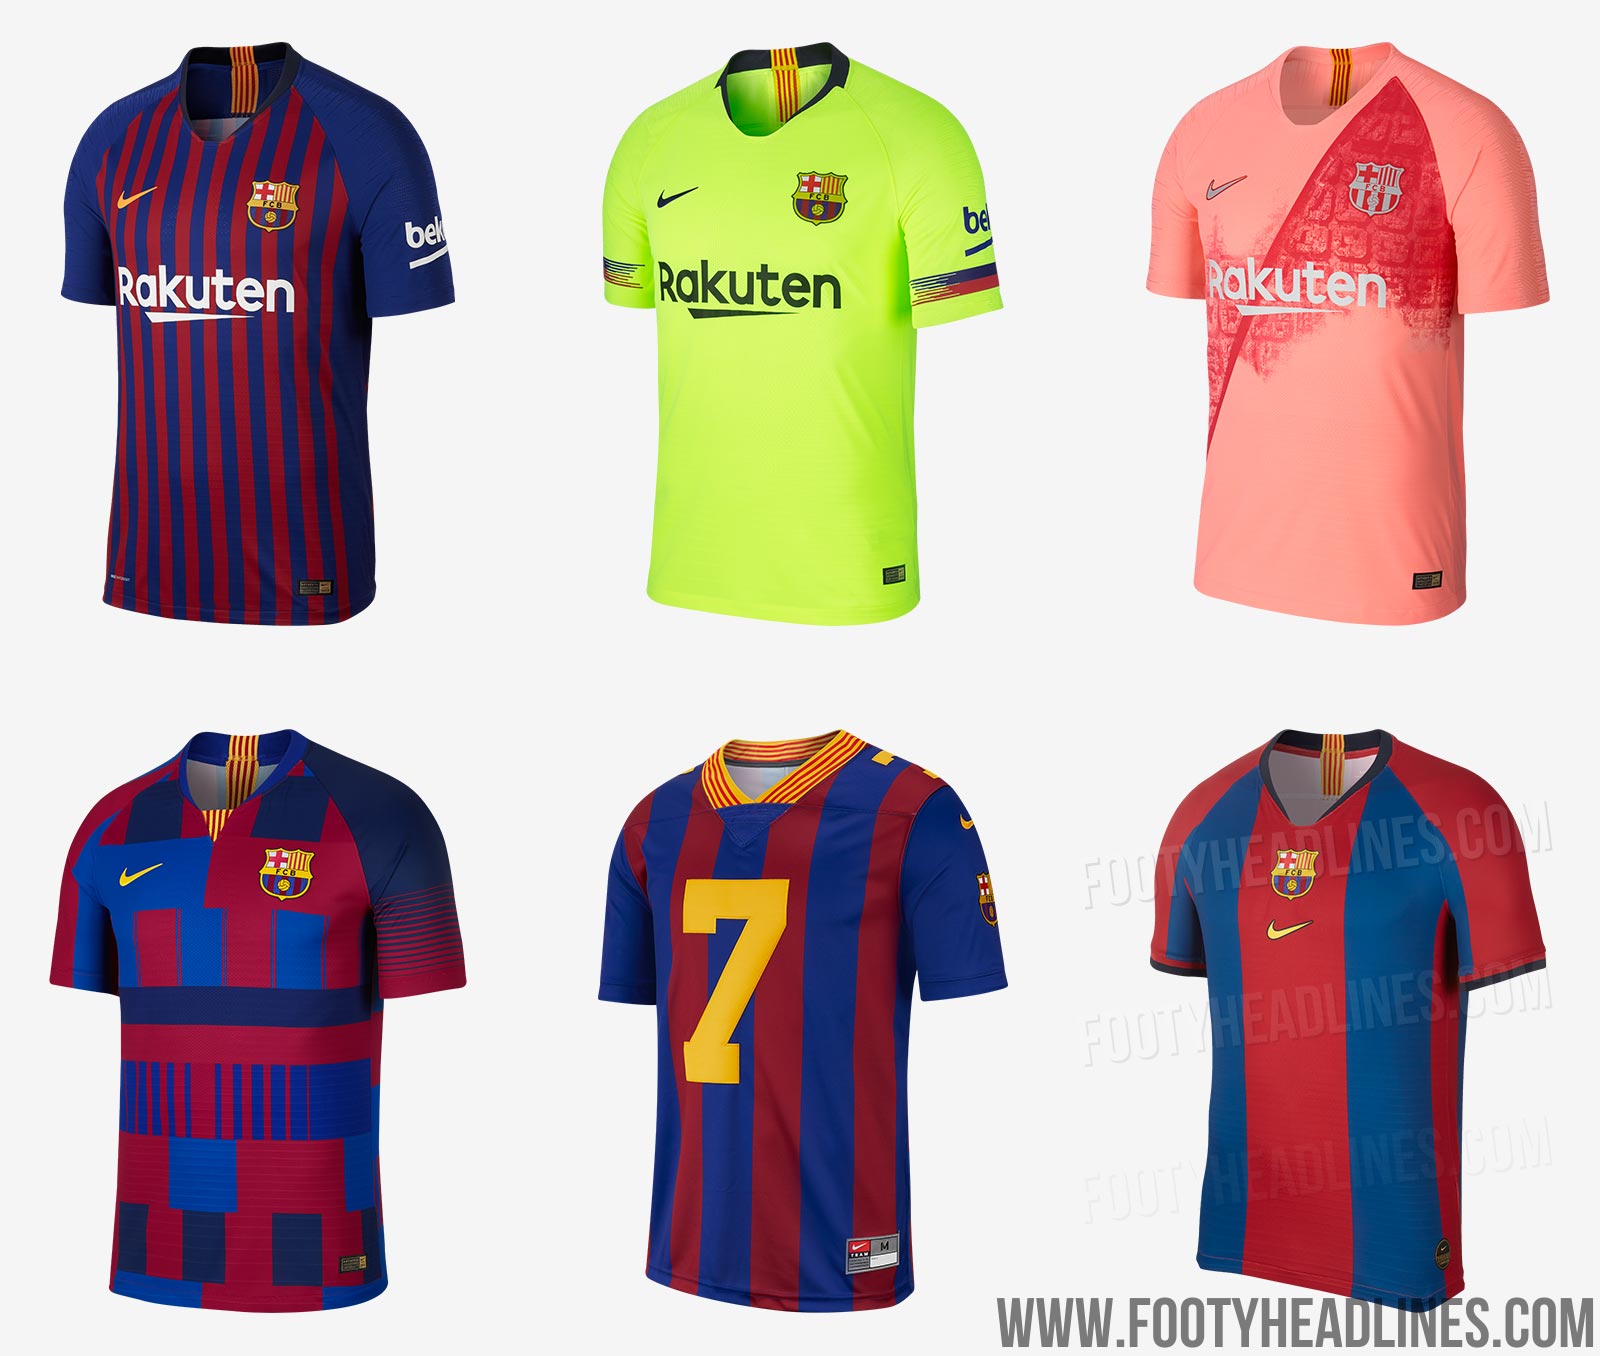 Nike to Release More Fourth Kits in 2019-20 - Footy Headlines